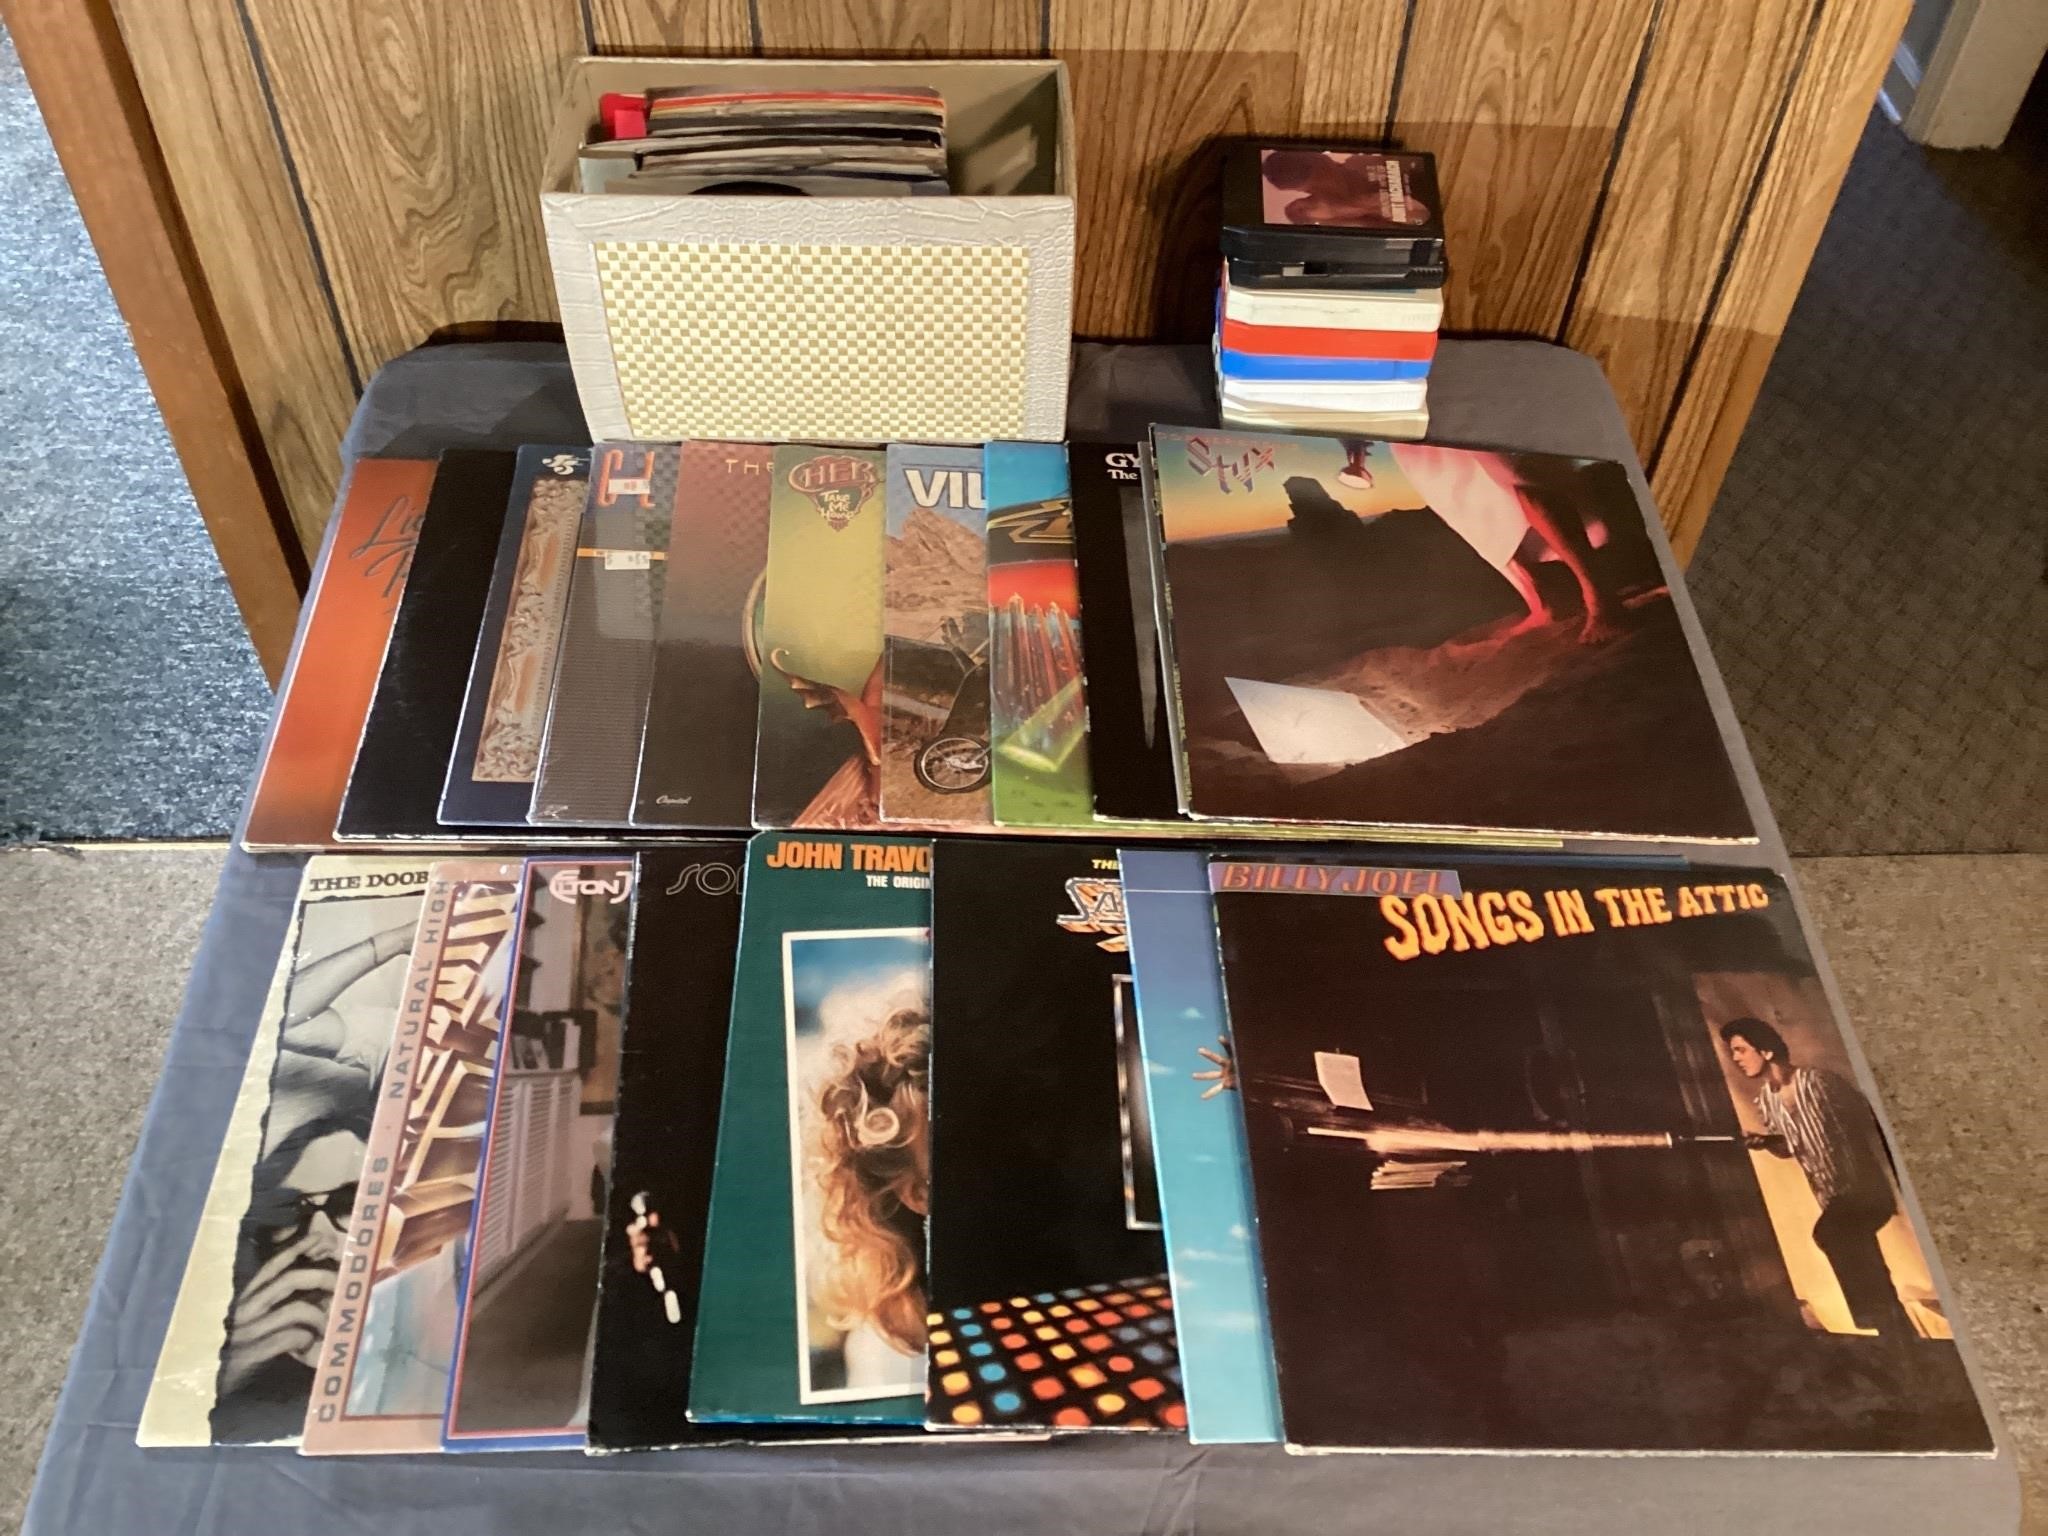 Assorted Eight tracks albums, and 45’s